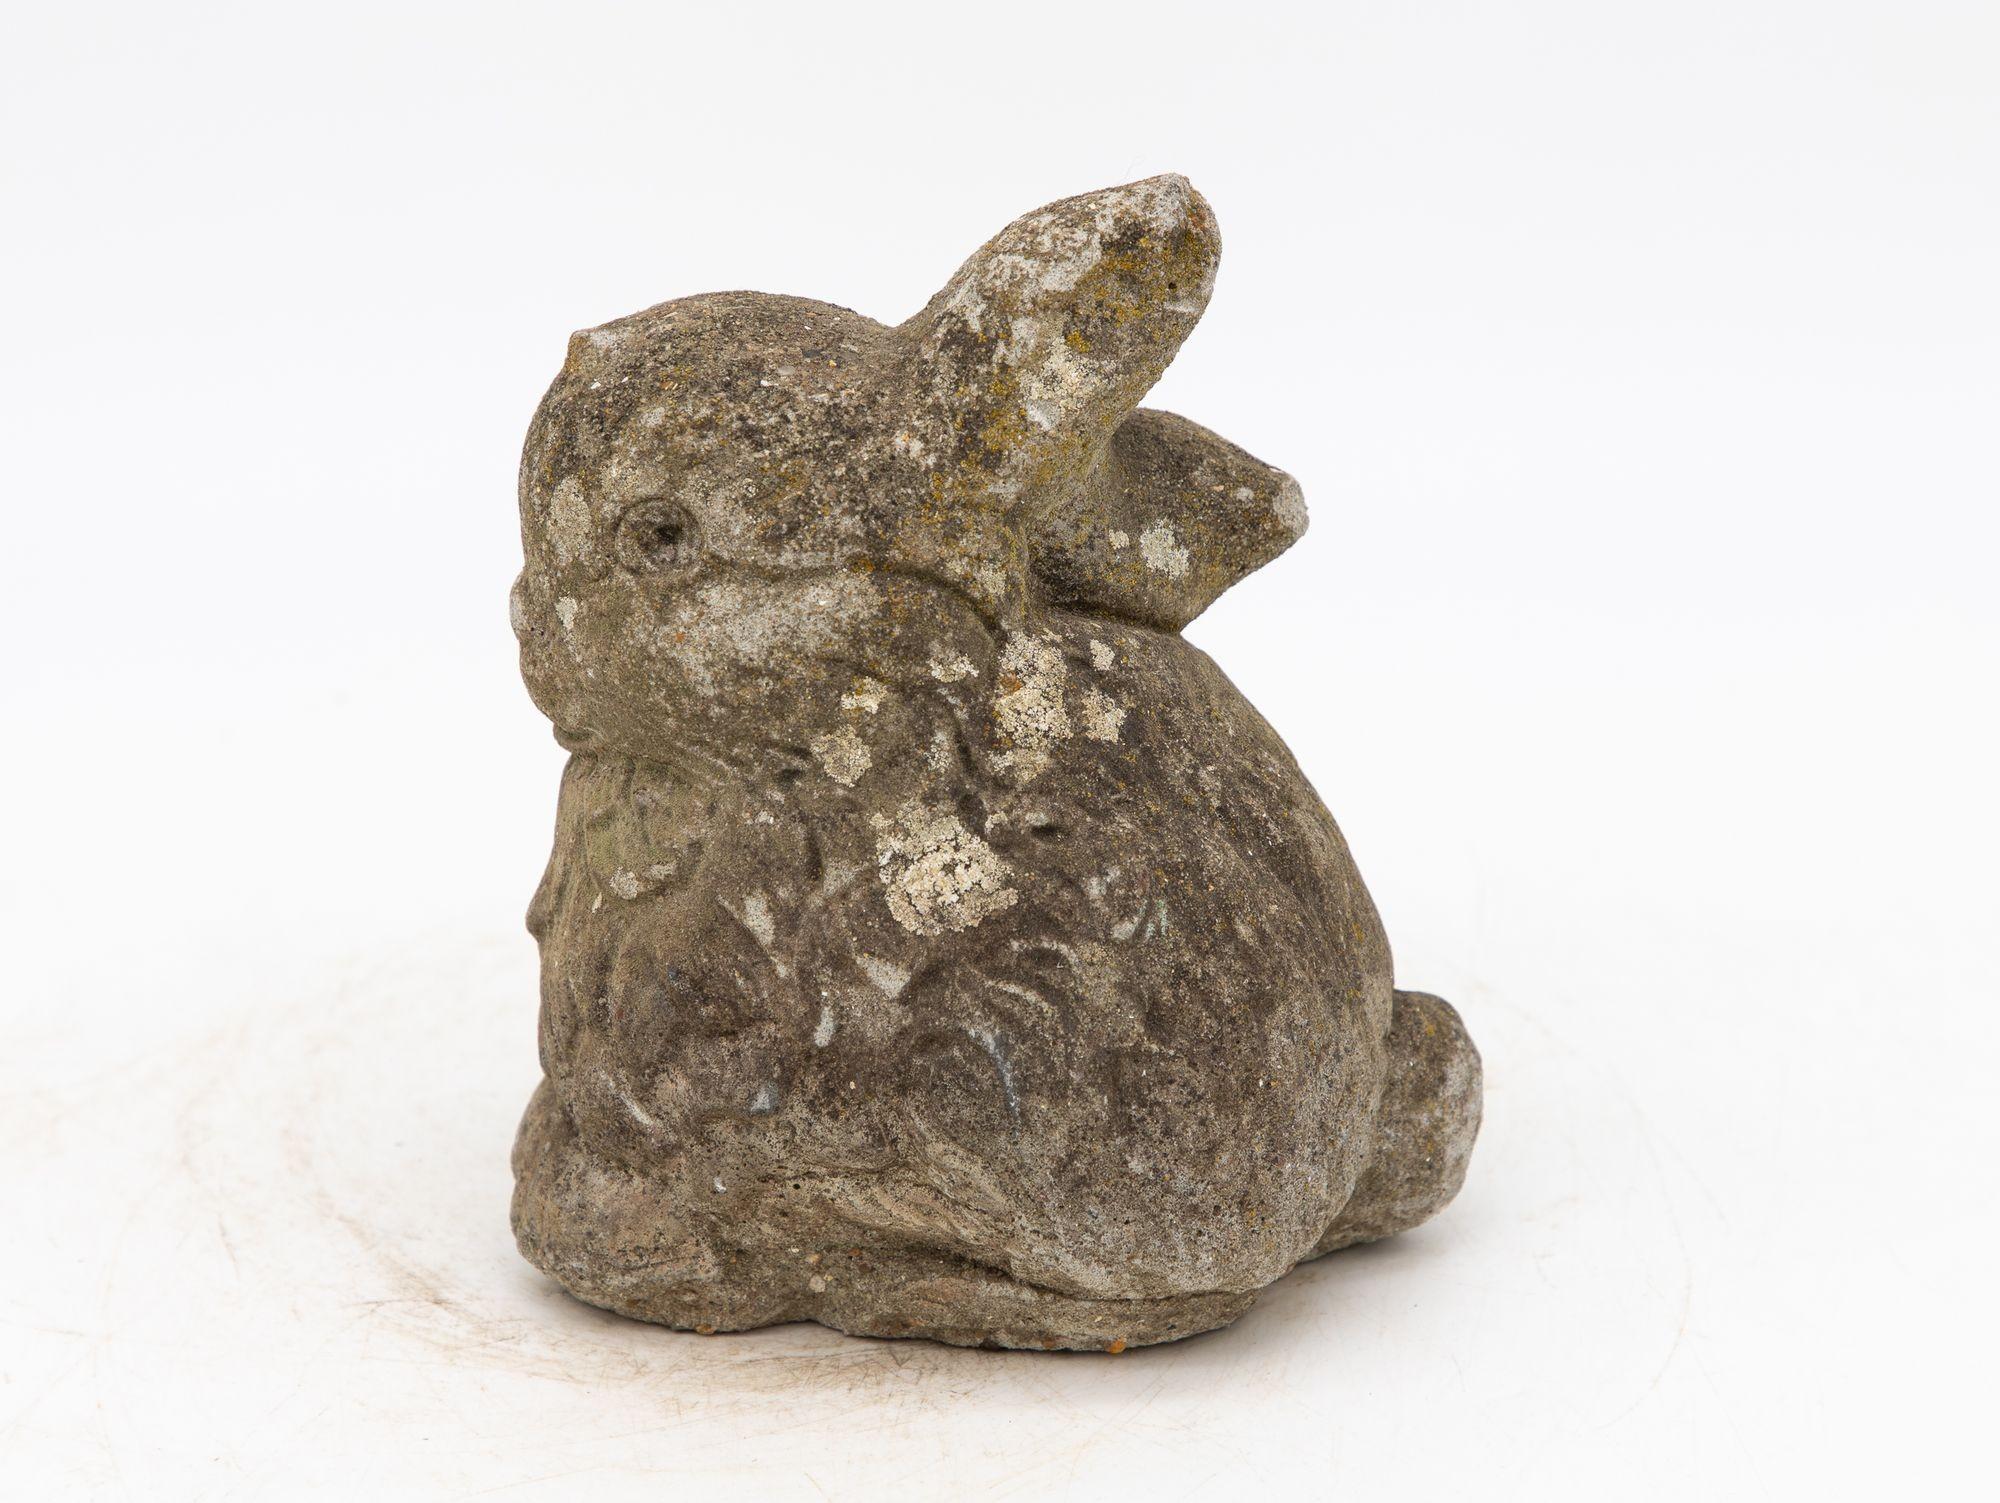 English Garden Ornament Bunny or Rabbit Reconstituted Stone, England Mid 20th C.